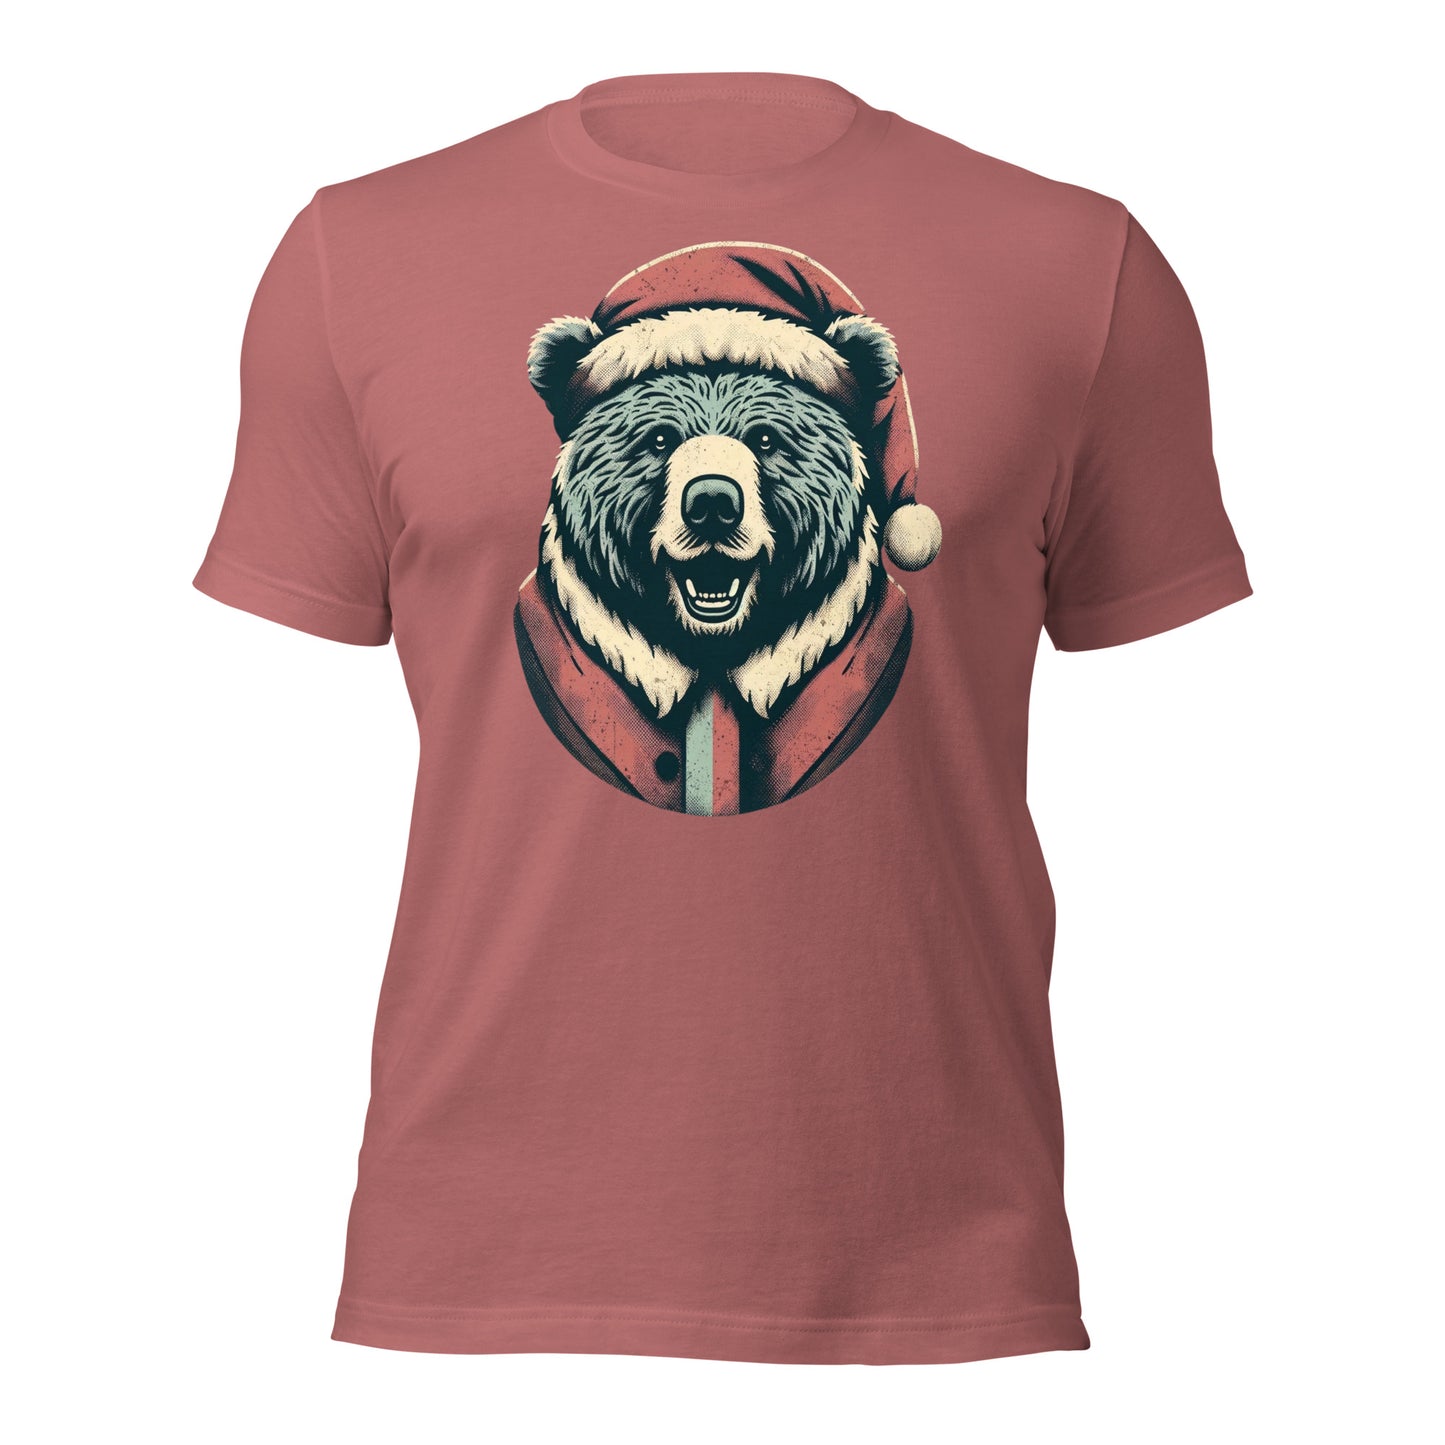 Bear-ly Merry: Rustic Christmas Retreat with Santa's Fuzziest Helpers Unisex t-shirt